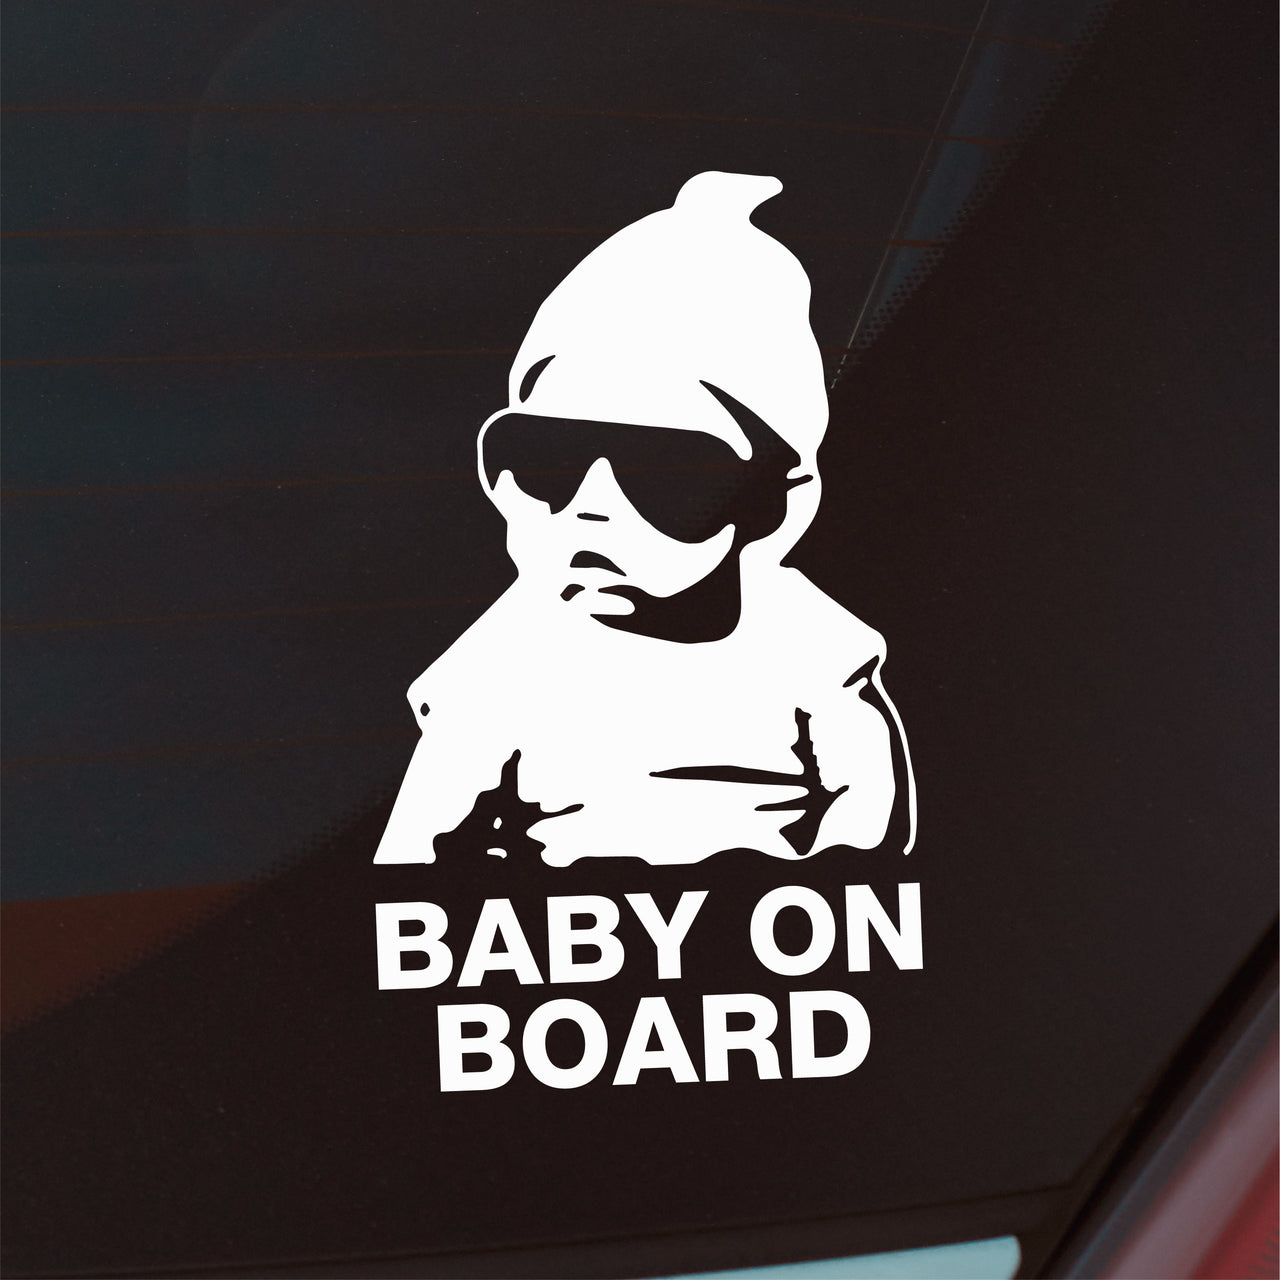 Baby On Board Car Decal - The Hangover